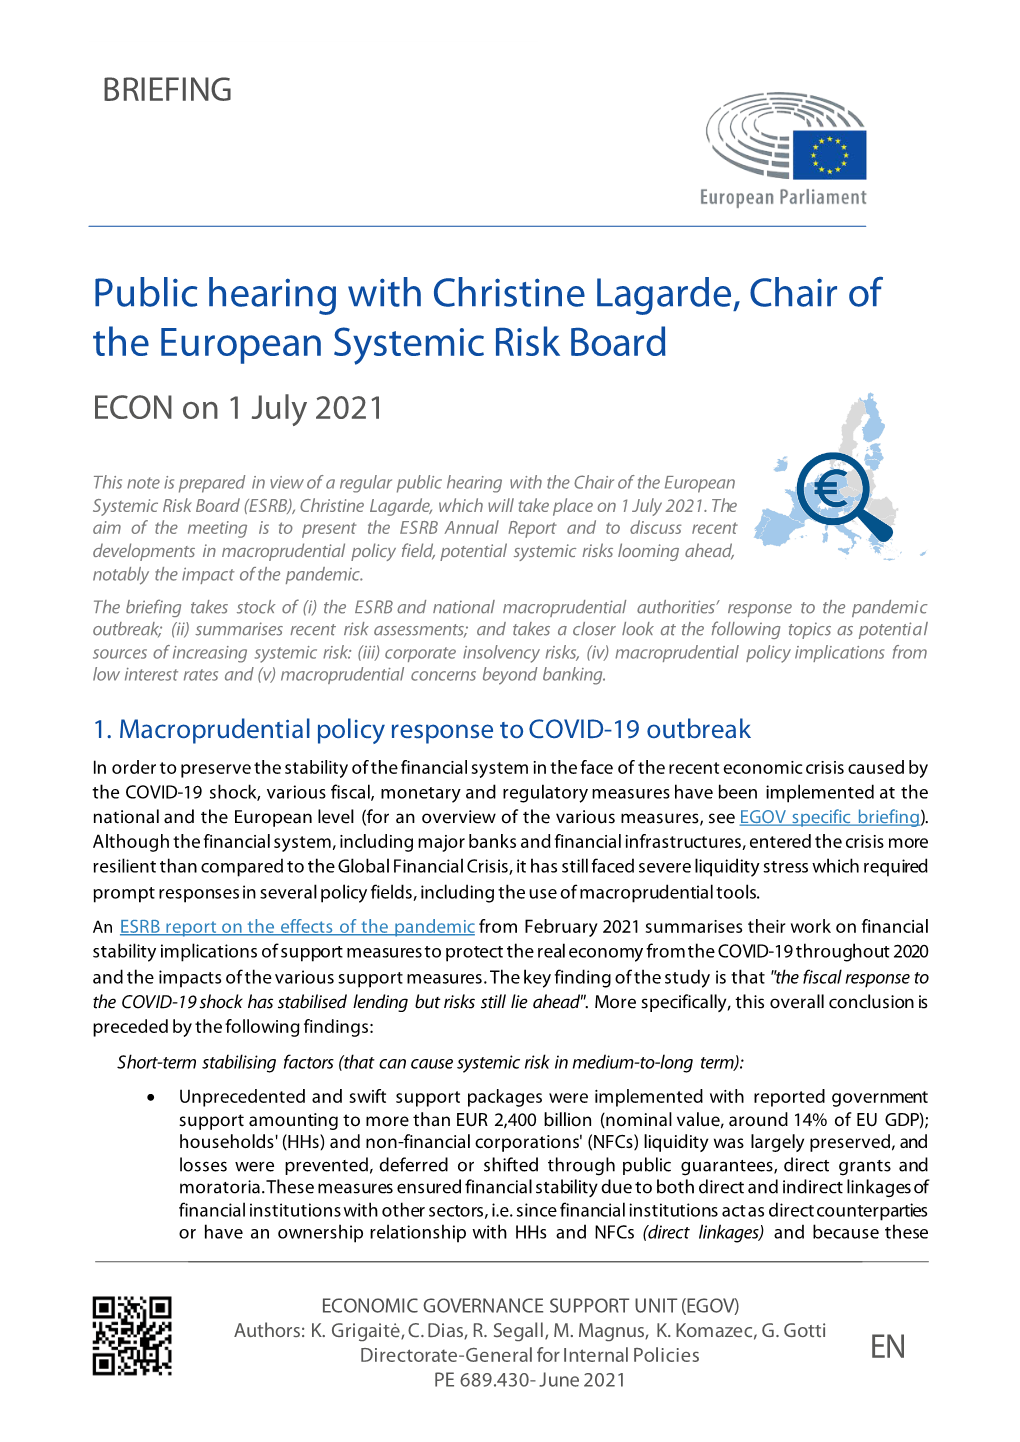 Public Hearing with Christine Lagarde, Chair of the European Systemic Risk Board ECON on 1 July 2021